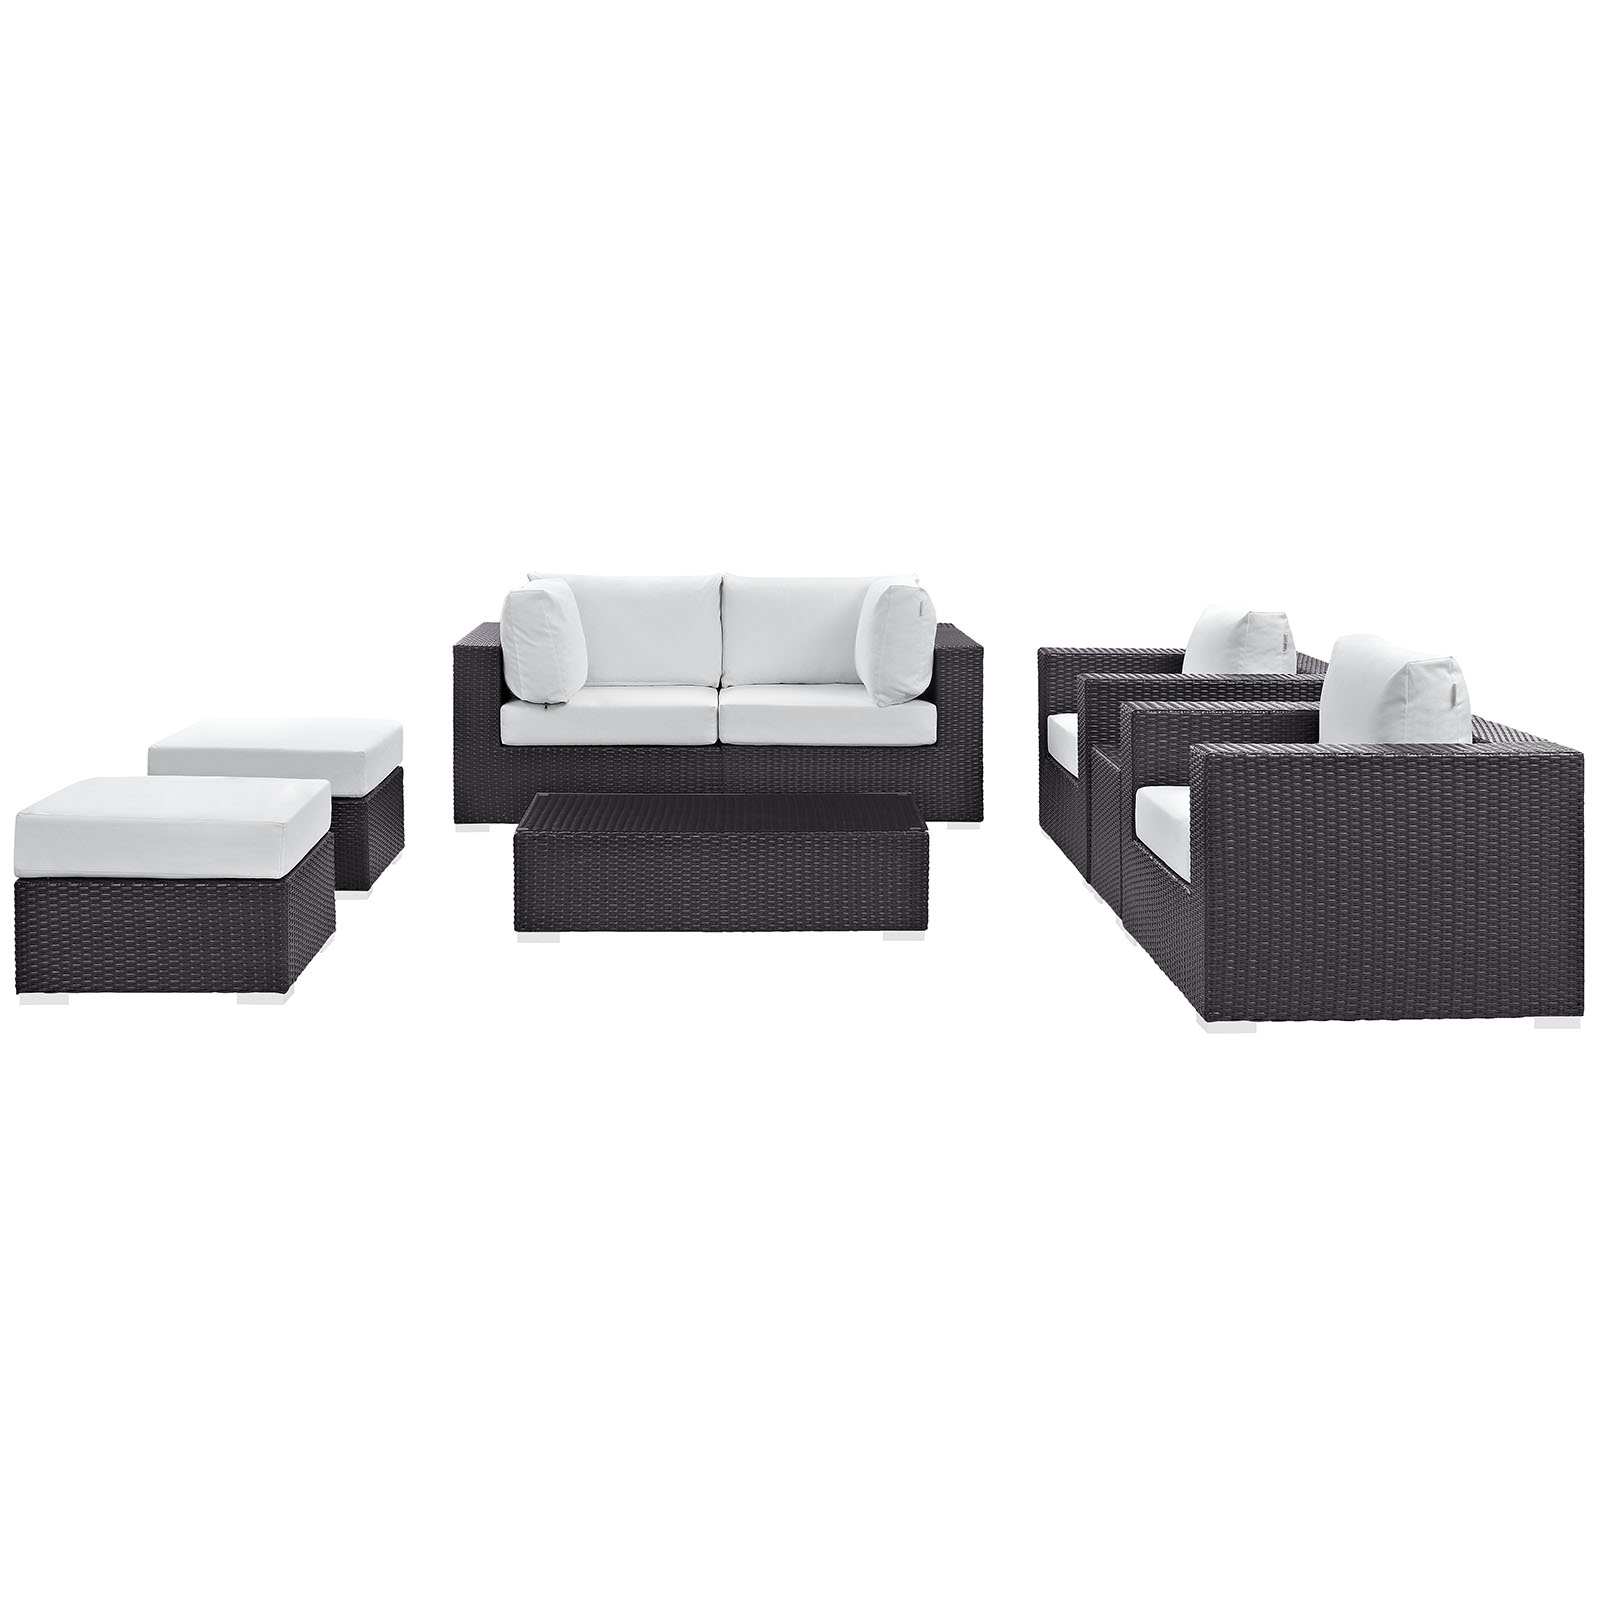 Modway Convene 8 Piece Outdoor Patio Sectional Set in Espresso White - image 4 of 11